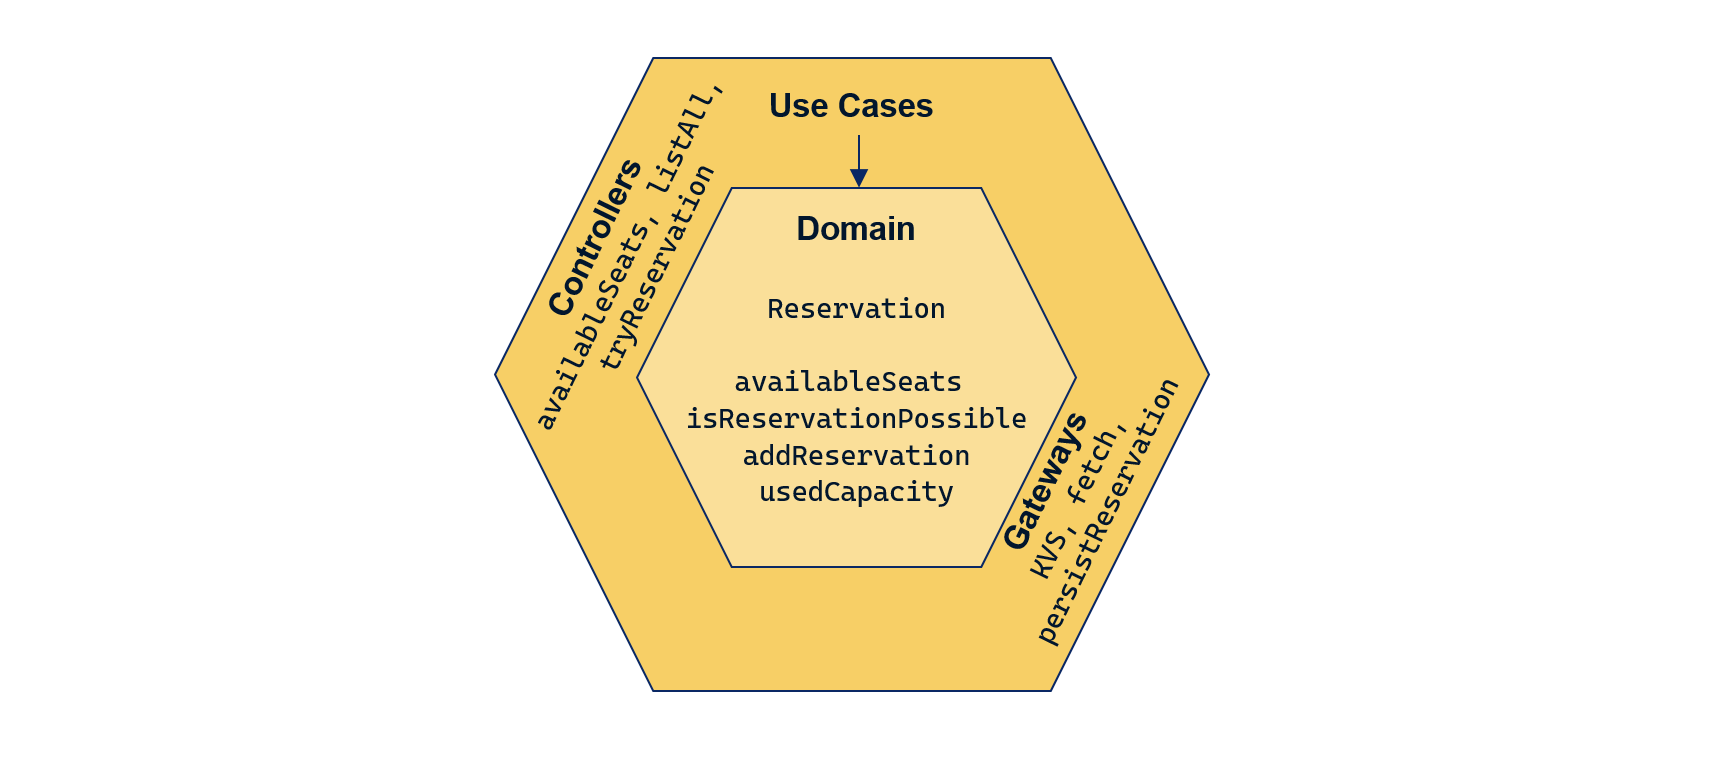 Use Cases layer